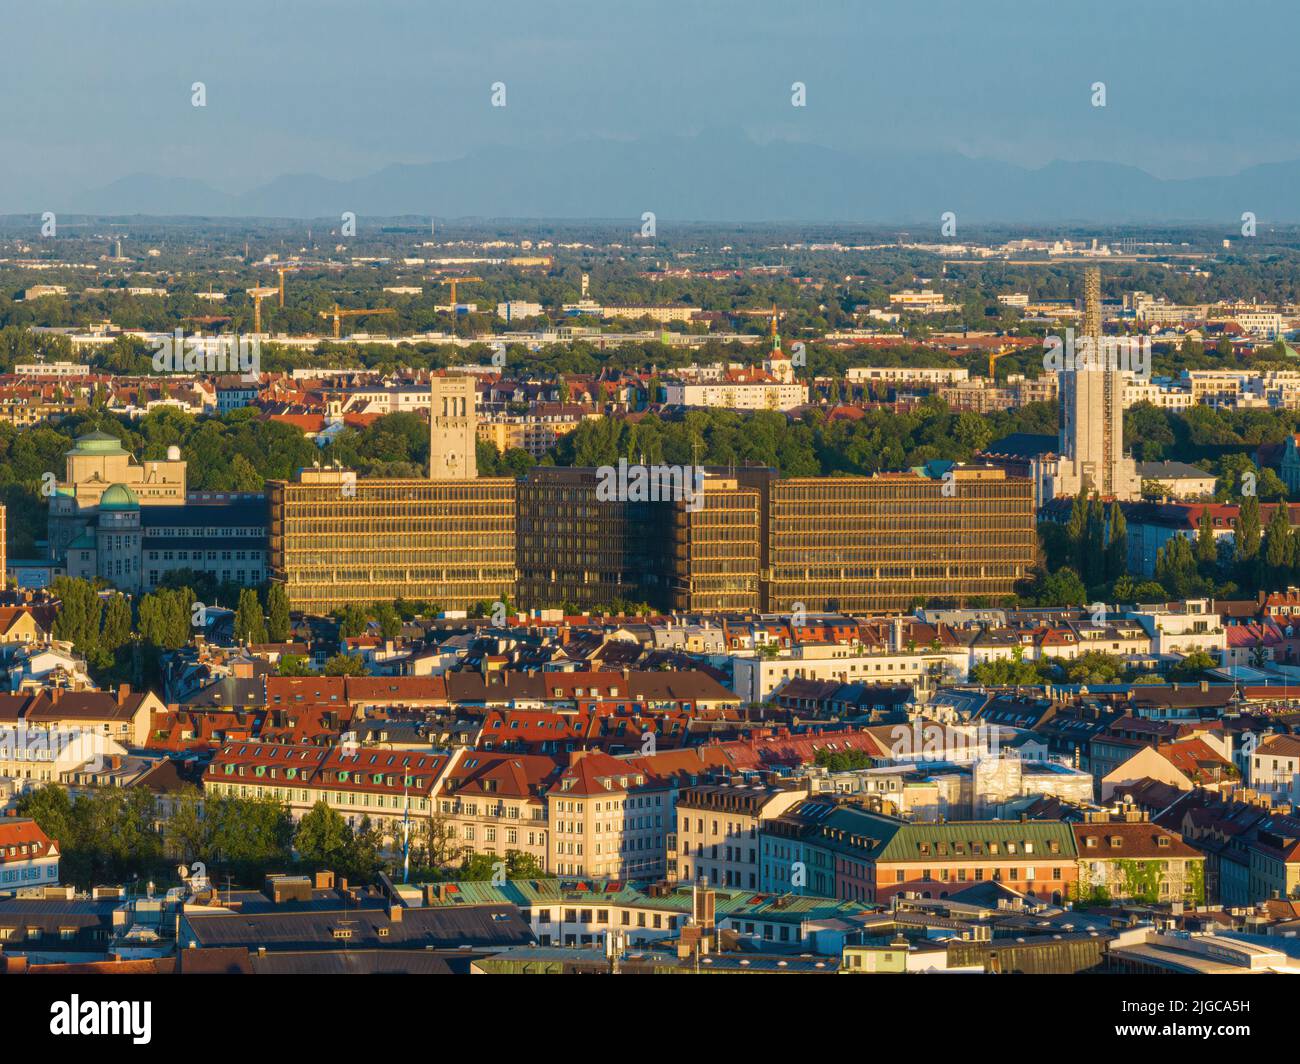 European Patent Office headquarters in Munich, Germany Stock Photo